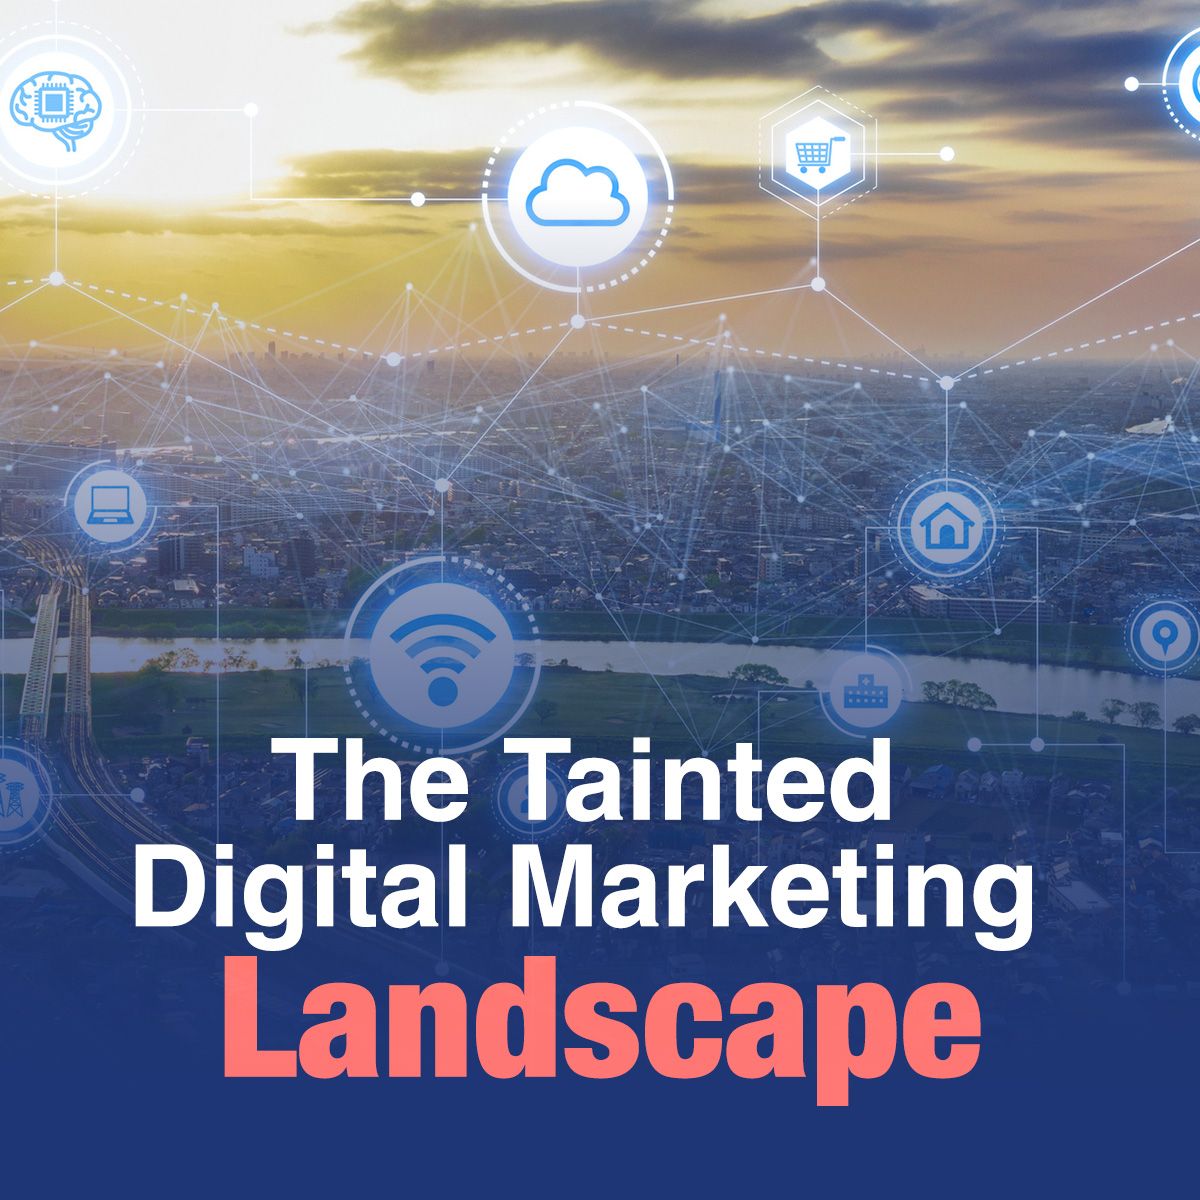 The Tainted Digital Marketing Landscape